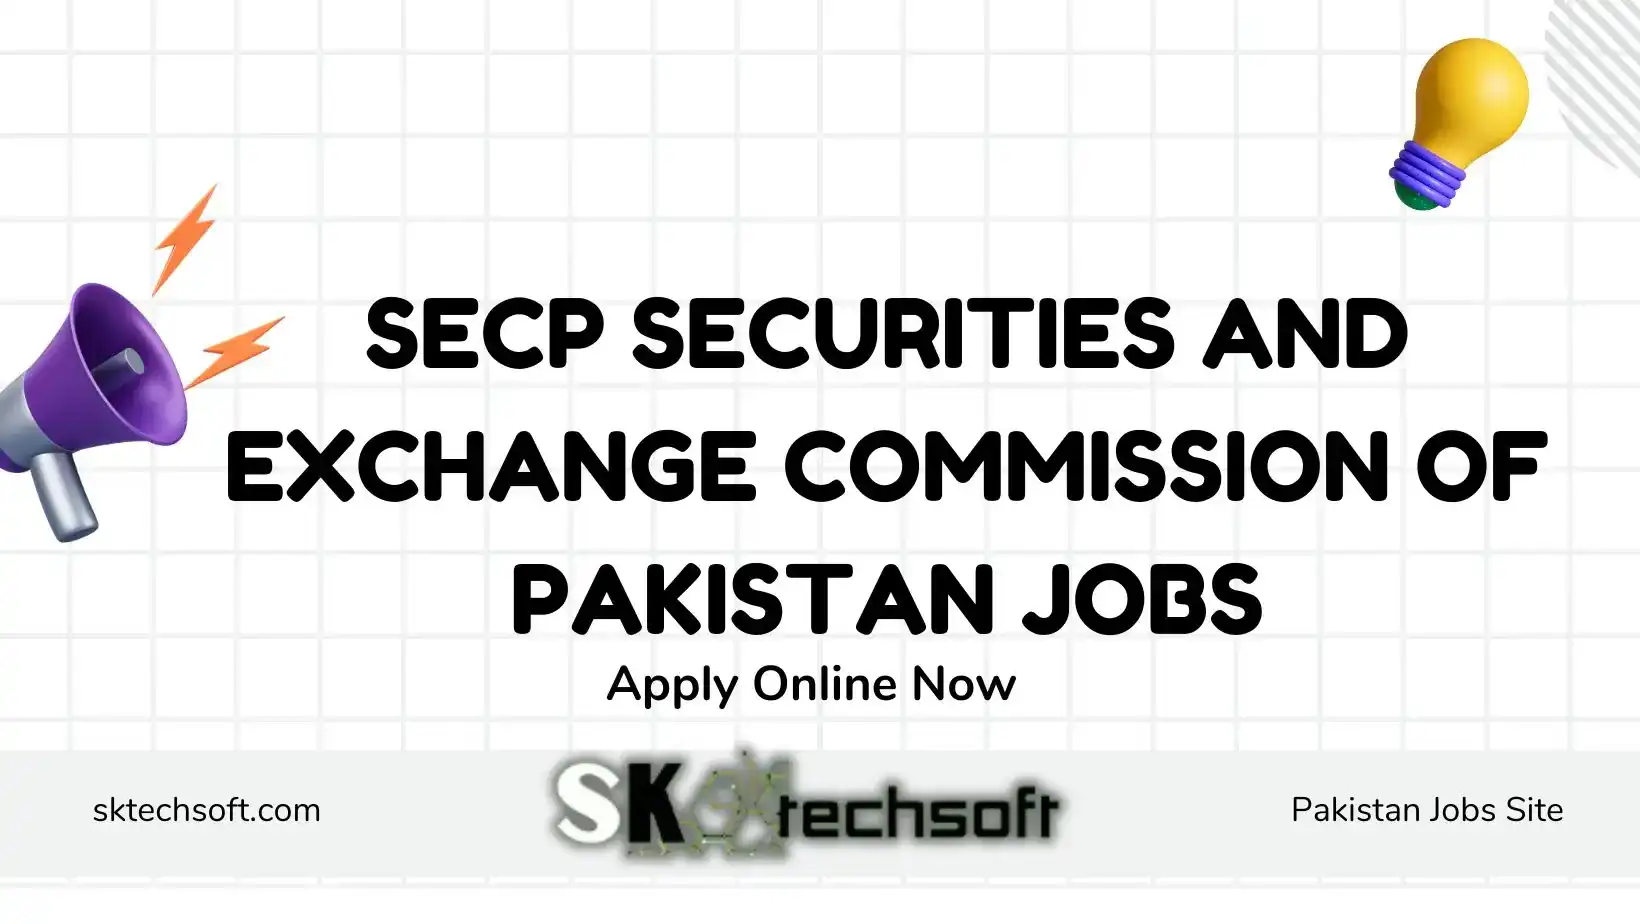 SECP SECURITIES AND EXCHANGE COMMISSION OF PAKISTAN JOBS